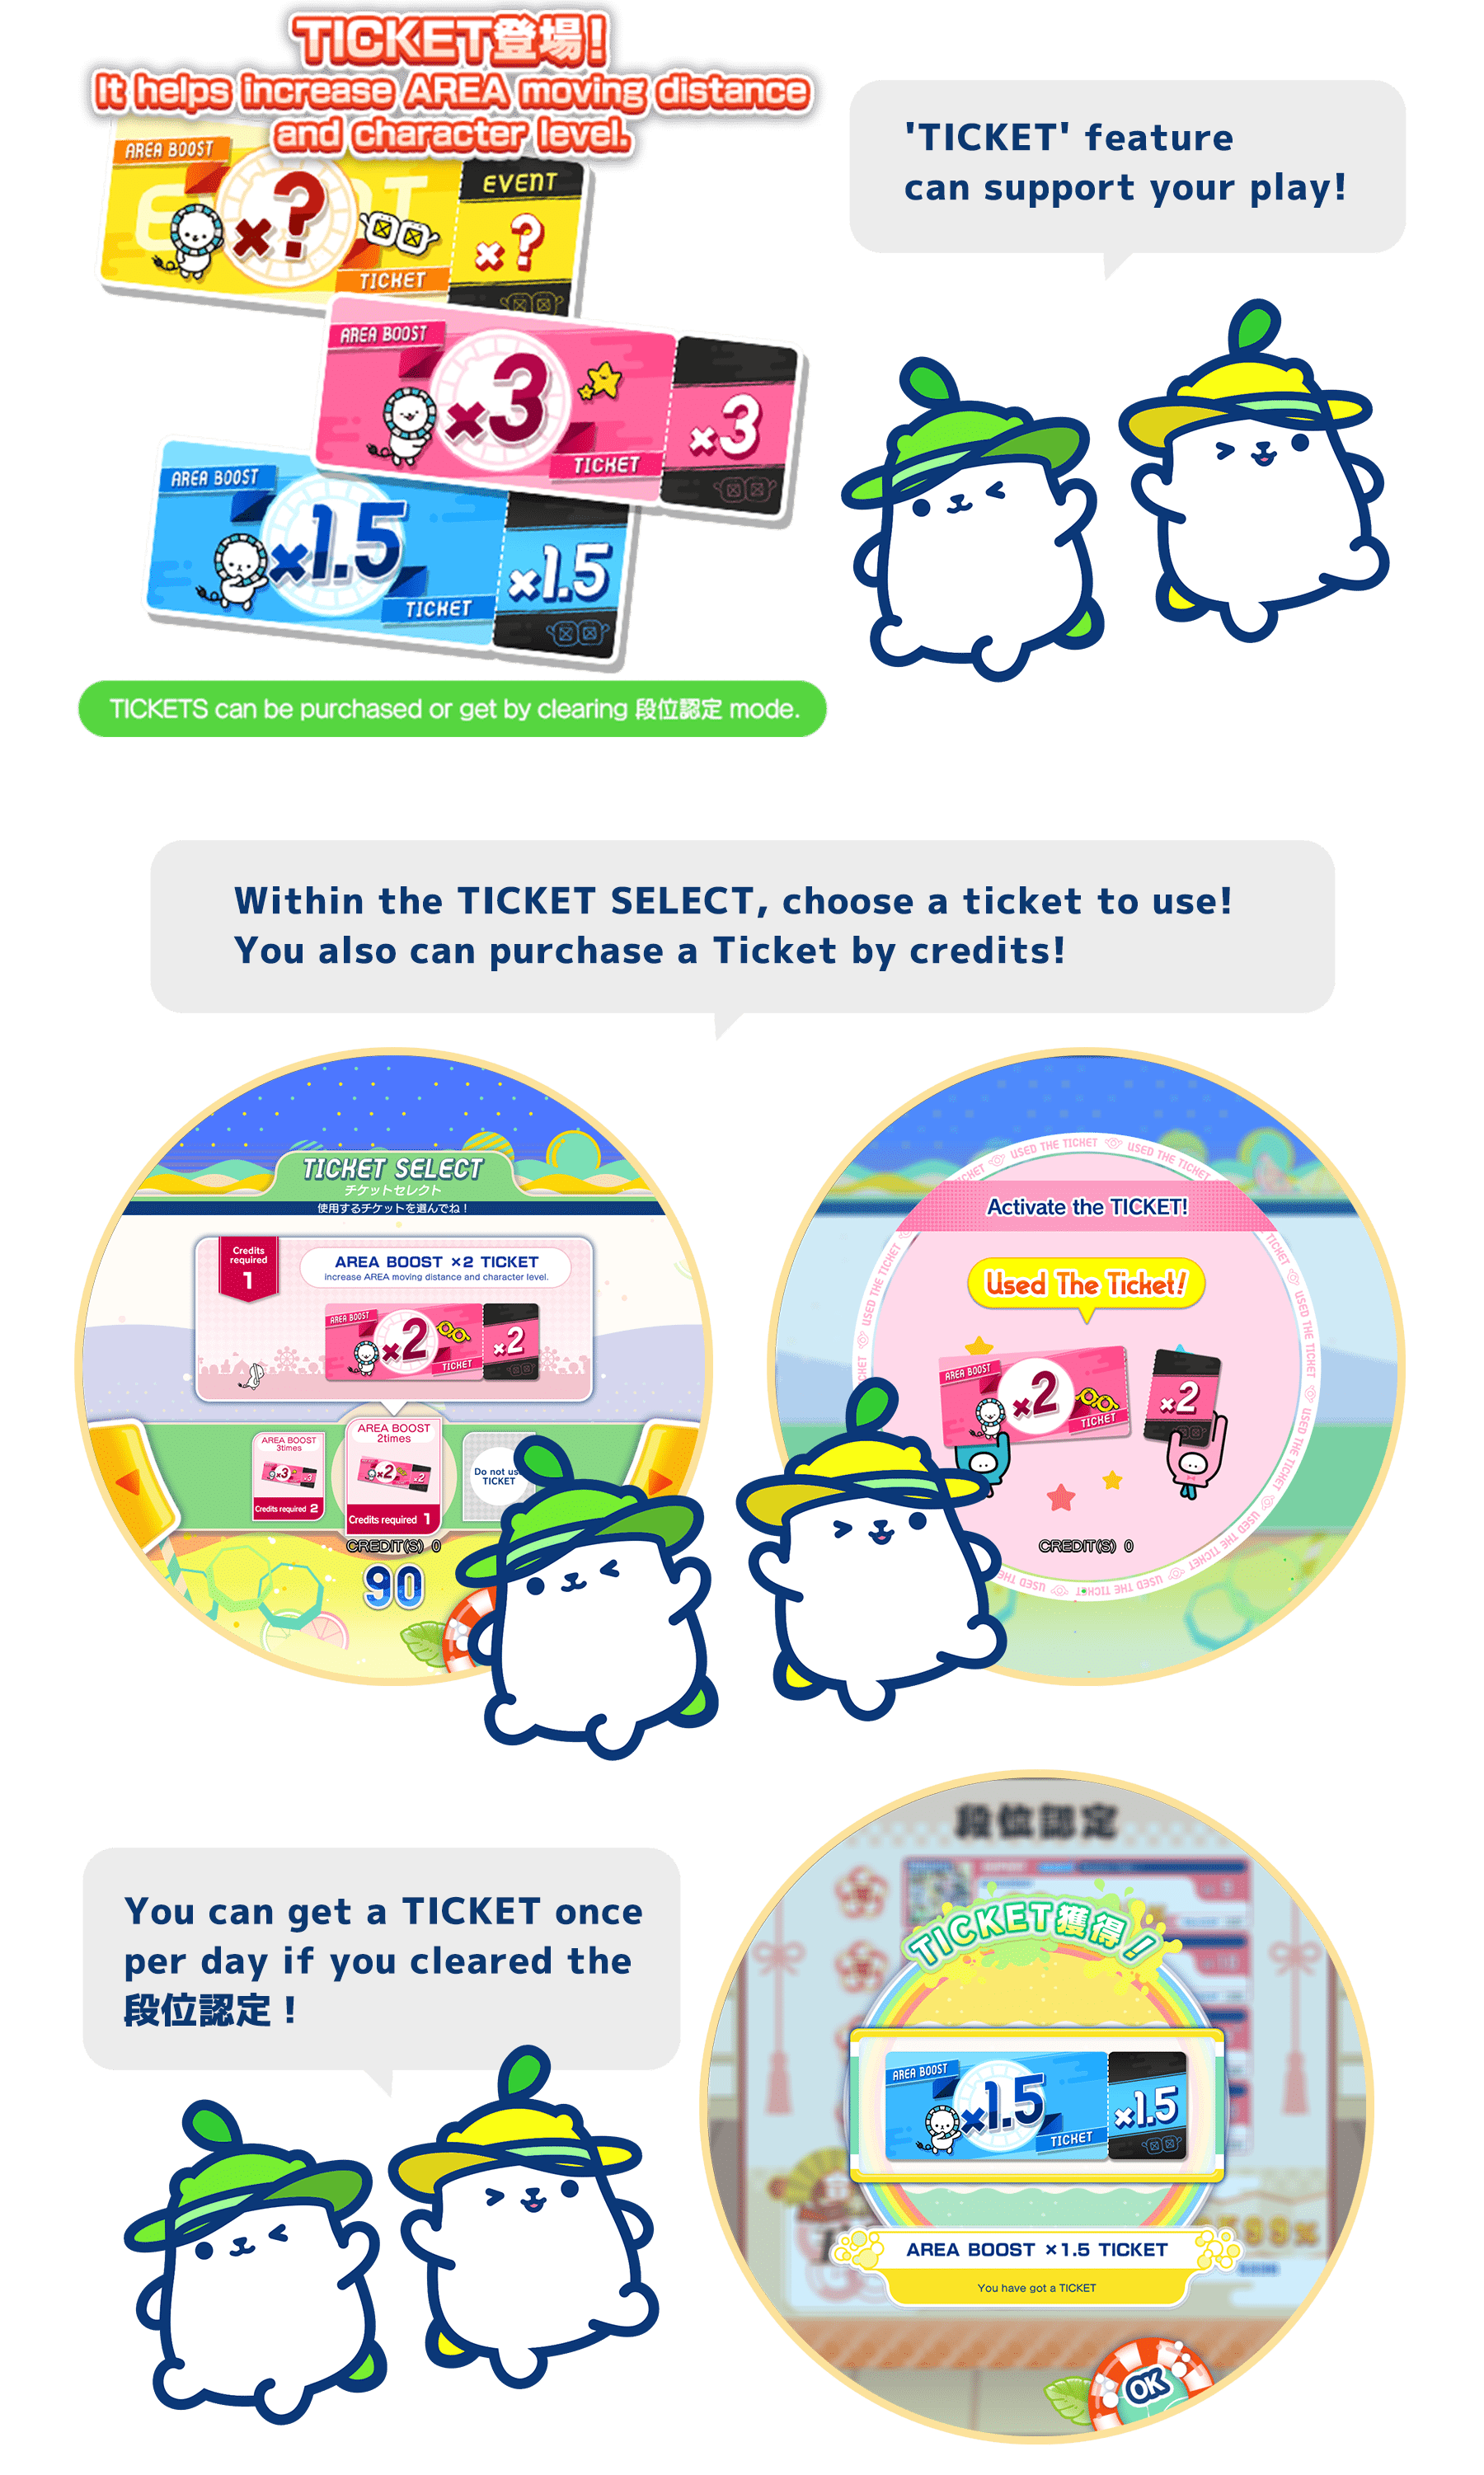 
          'TICKET' feature
          can support your play!
          Within the TICKET SELECT, choose a ticket to use!
          You also can purchase a Ticket by credits!
          You can get a TICKET once per day if you cleared the 段位認定!
          